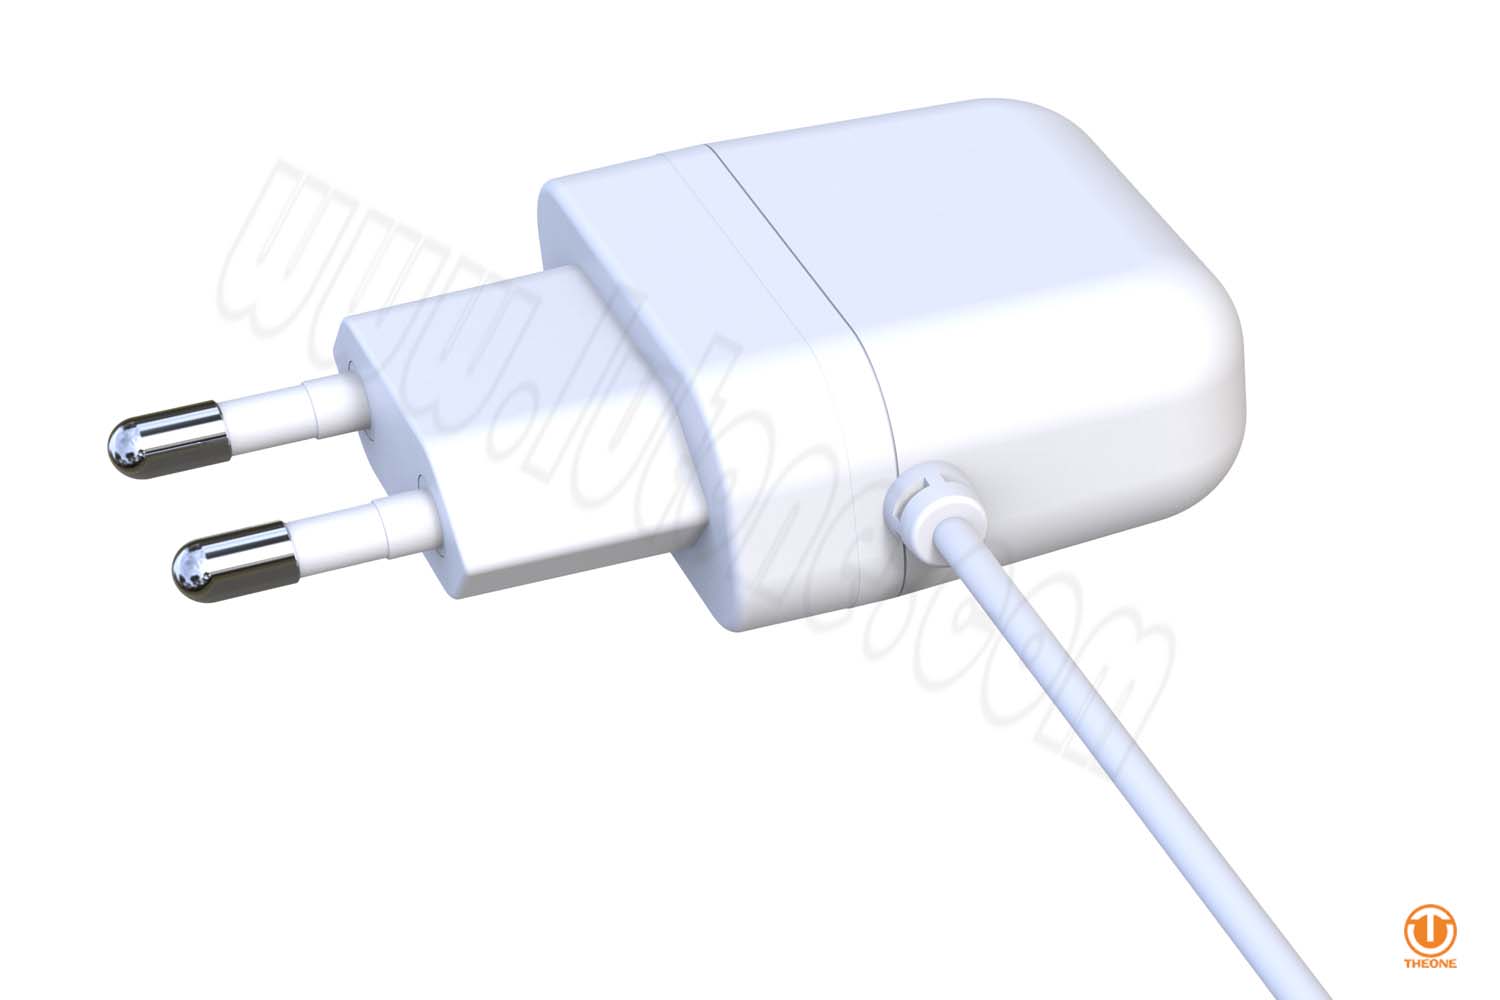 tc02b5-1 wired wall charger